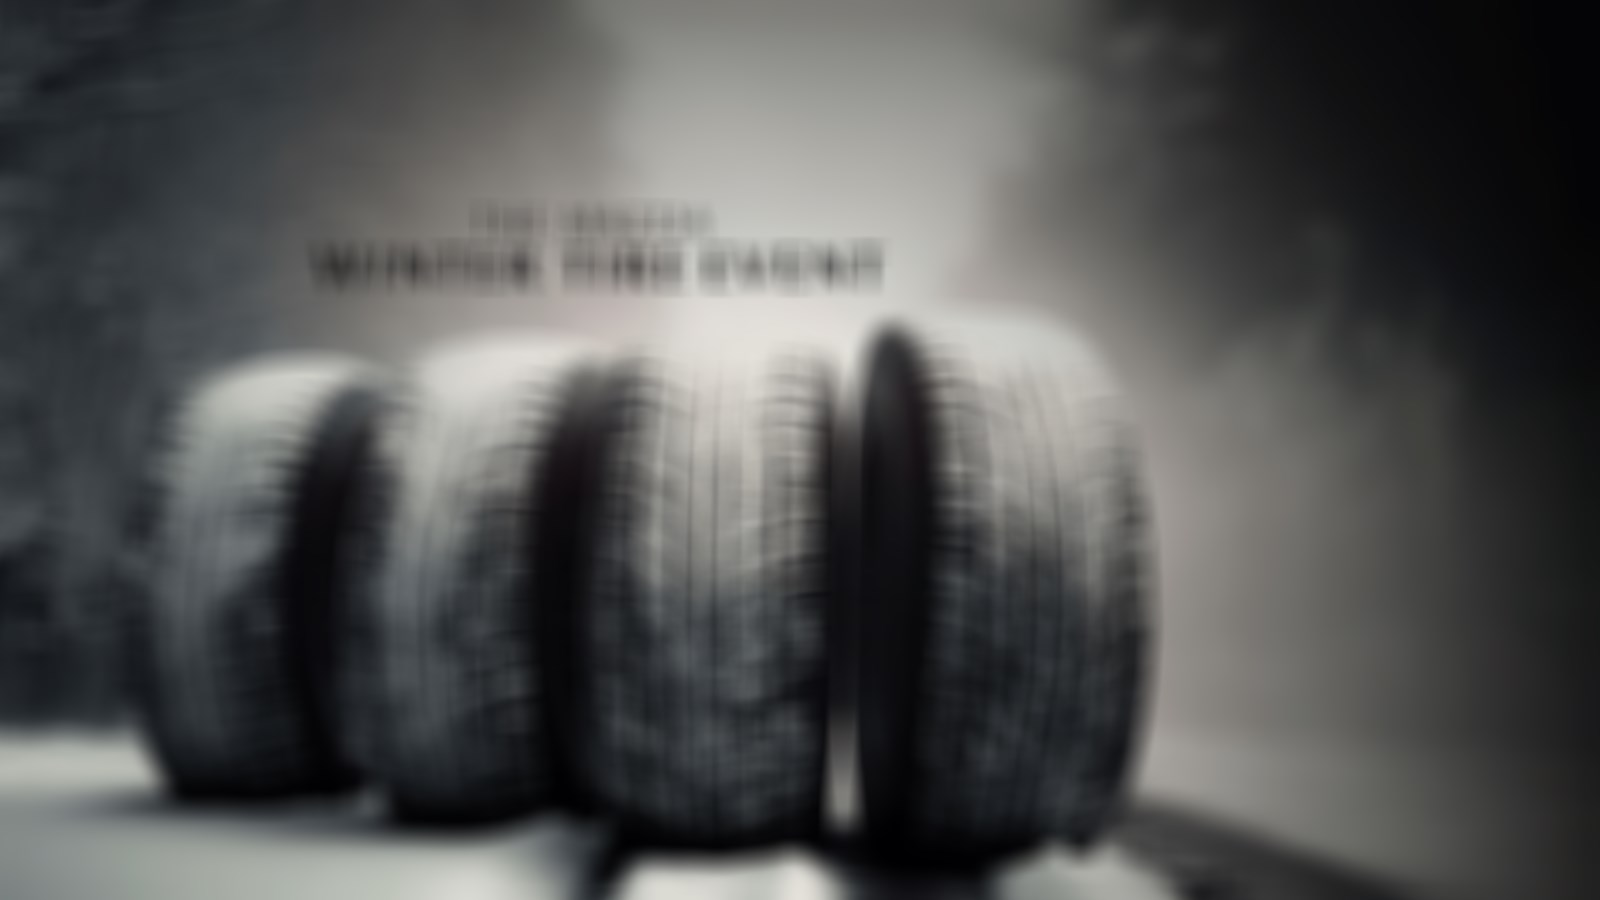 A set of four winter tires on a snowy background